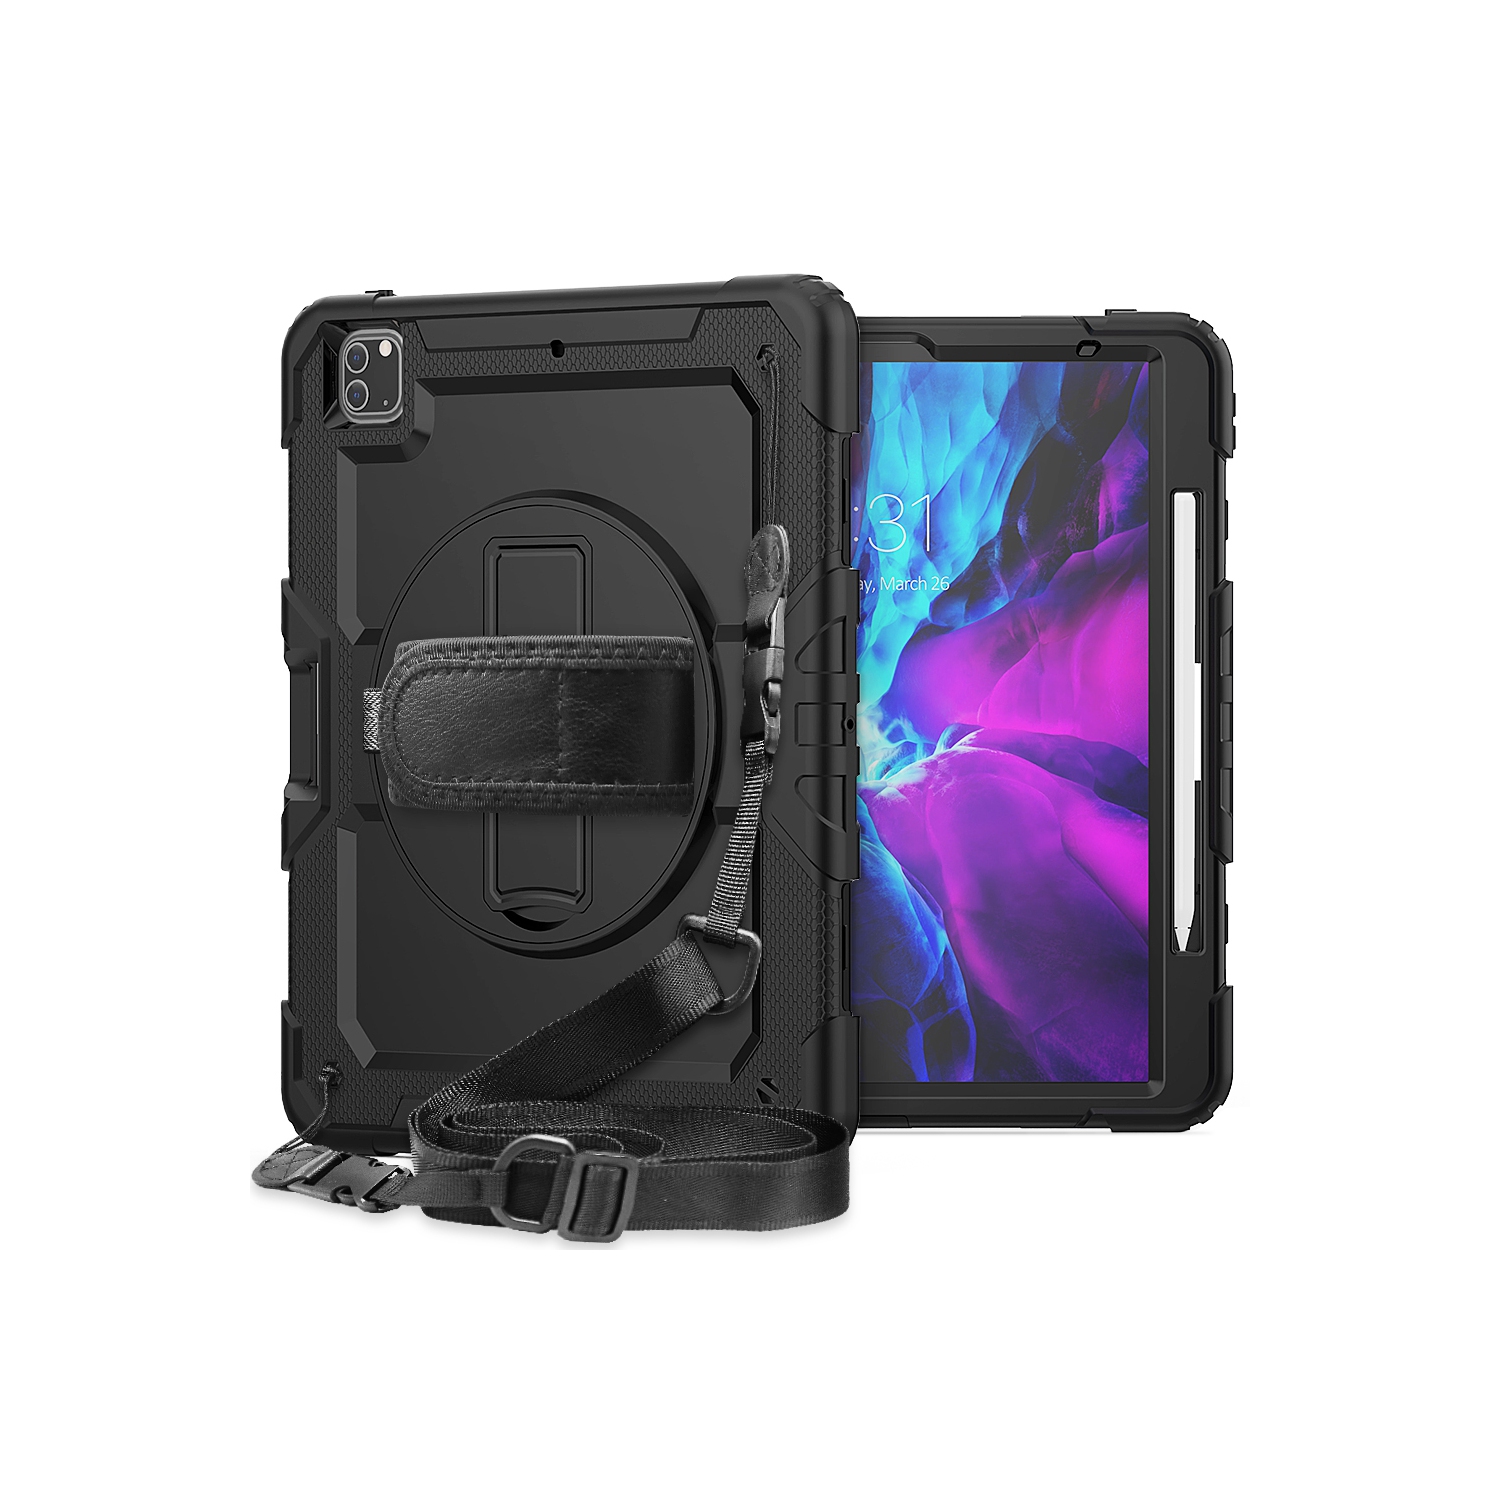 Handle/Strap for iPad 12.9 Inch 2021 Rotating Stand Black Military Grade Heavy Duty Shockproof Rugged Protective Cover with Pencil Hoder iPad Pro 12.9 Case 2021 5th Generation 